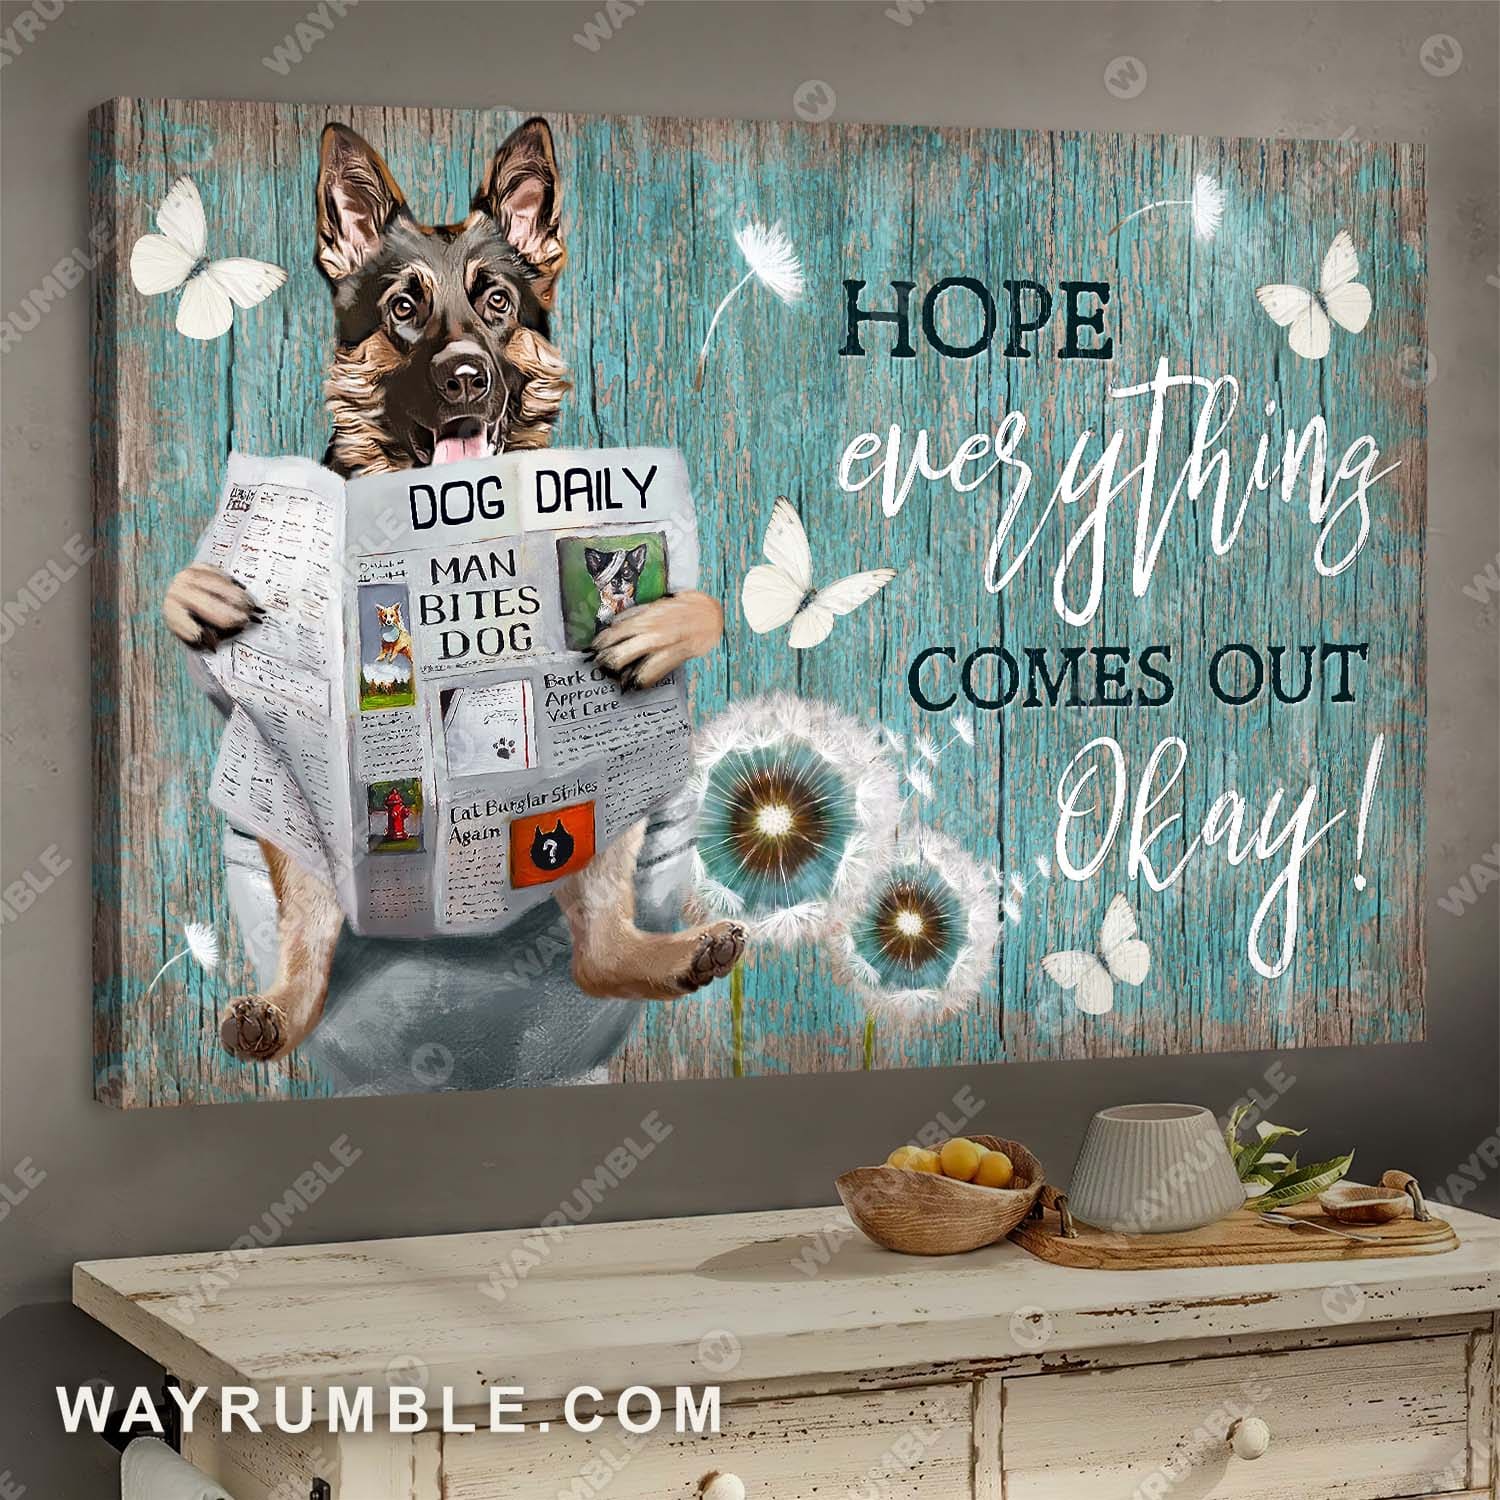 German Shepherd, Dandelion, Daily routine, Hope everything comes out okay - Dog Landscape Canvas Prints, Wall Art